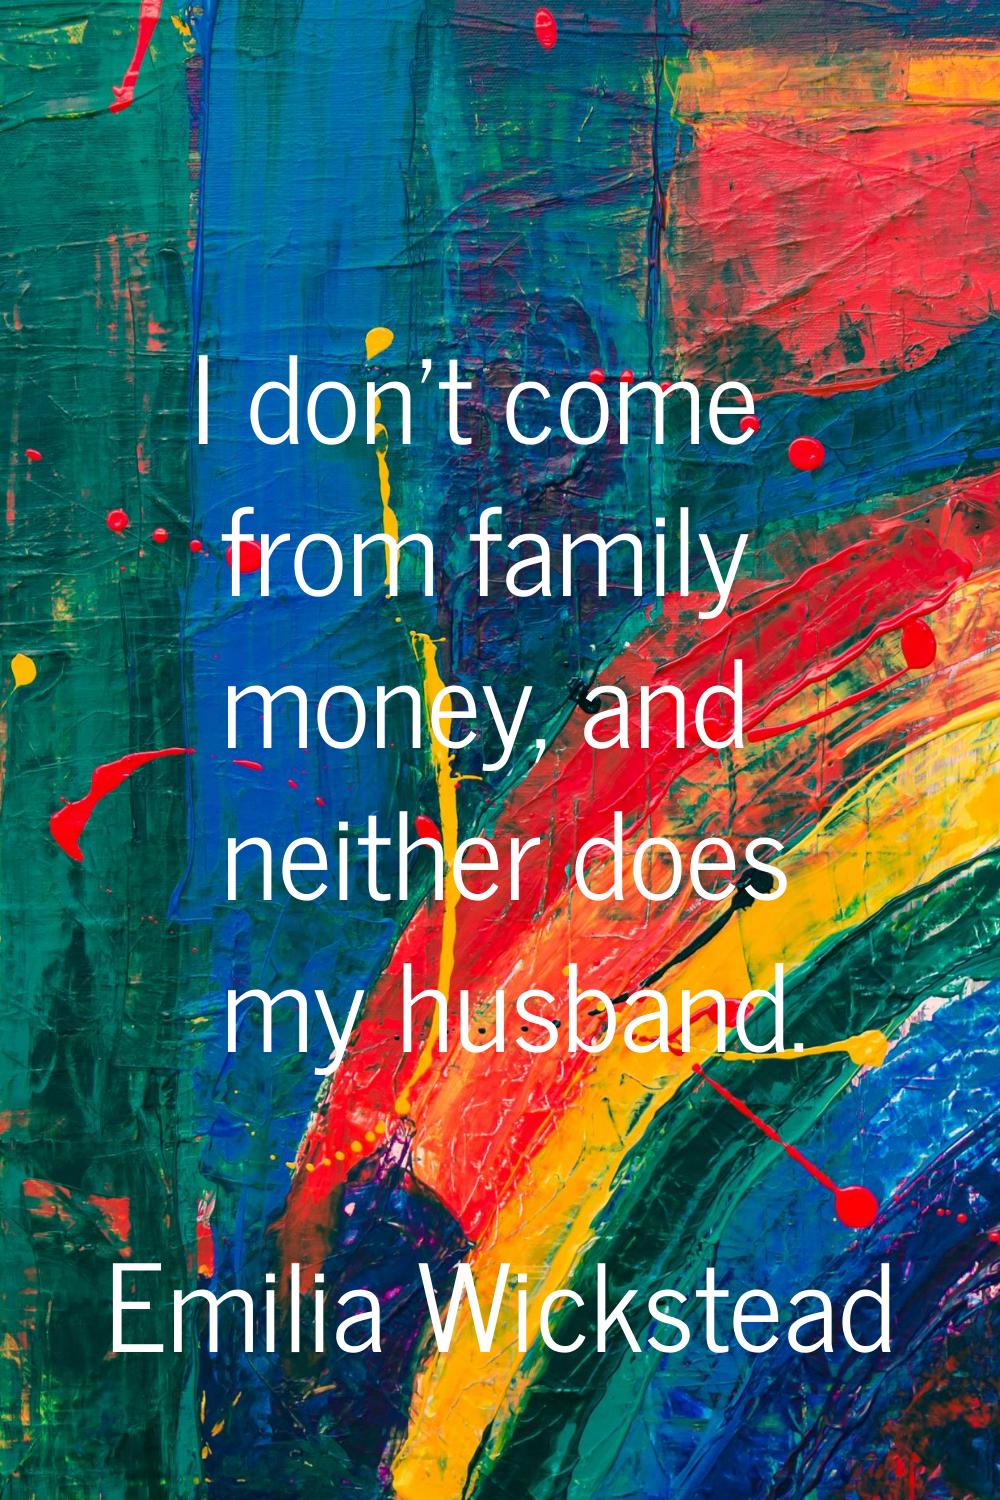 I don't come from family money, and neither does my husband.